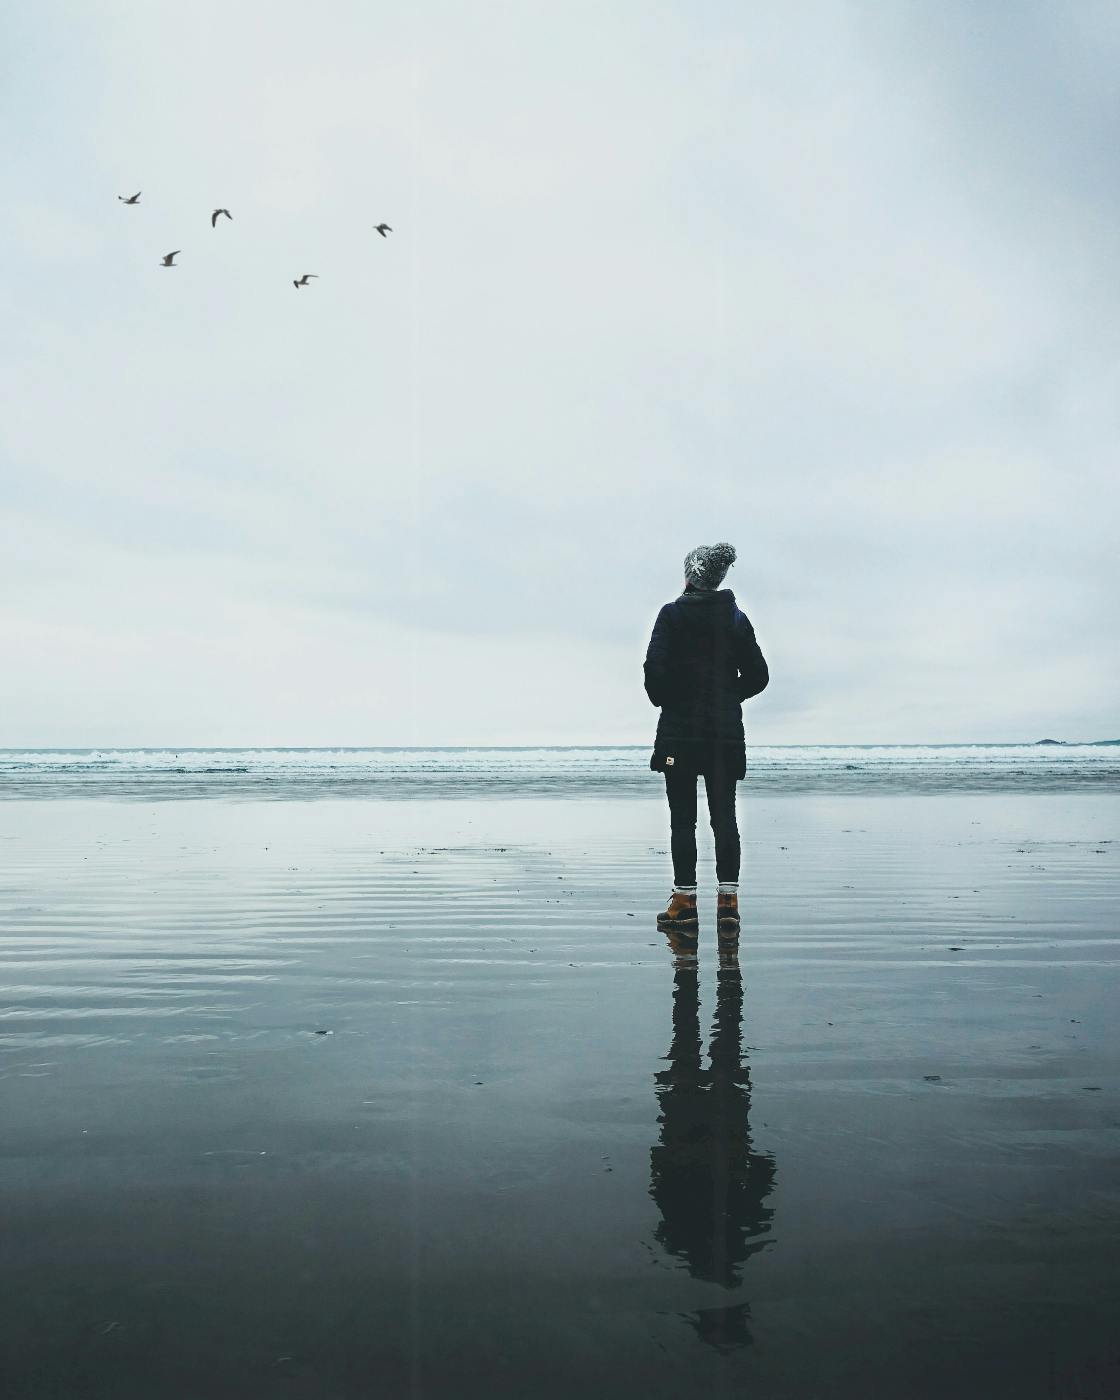 A woman in a coat and hat, standing on a wet beach at low tide, watching birds fly